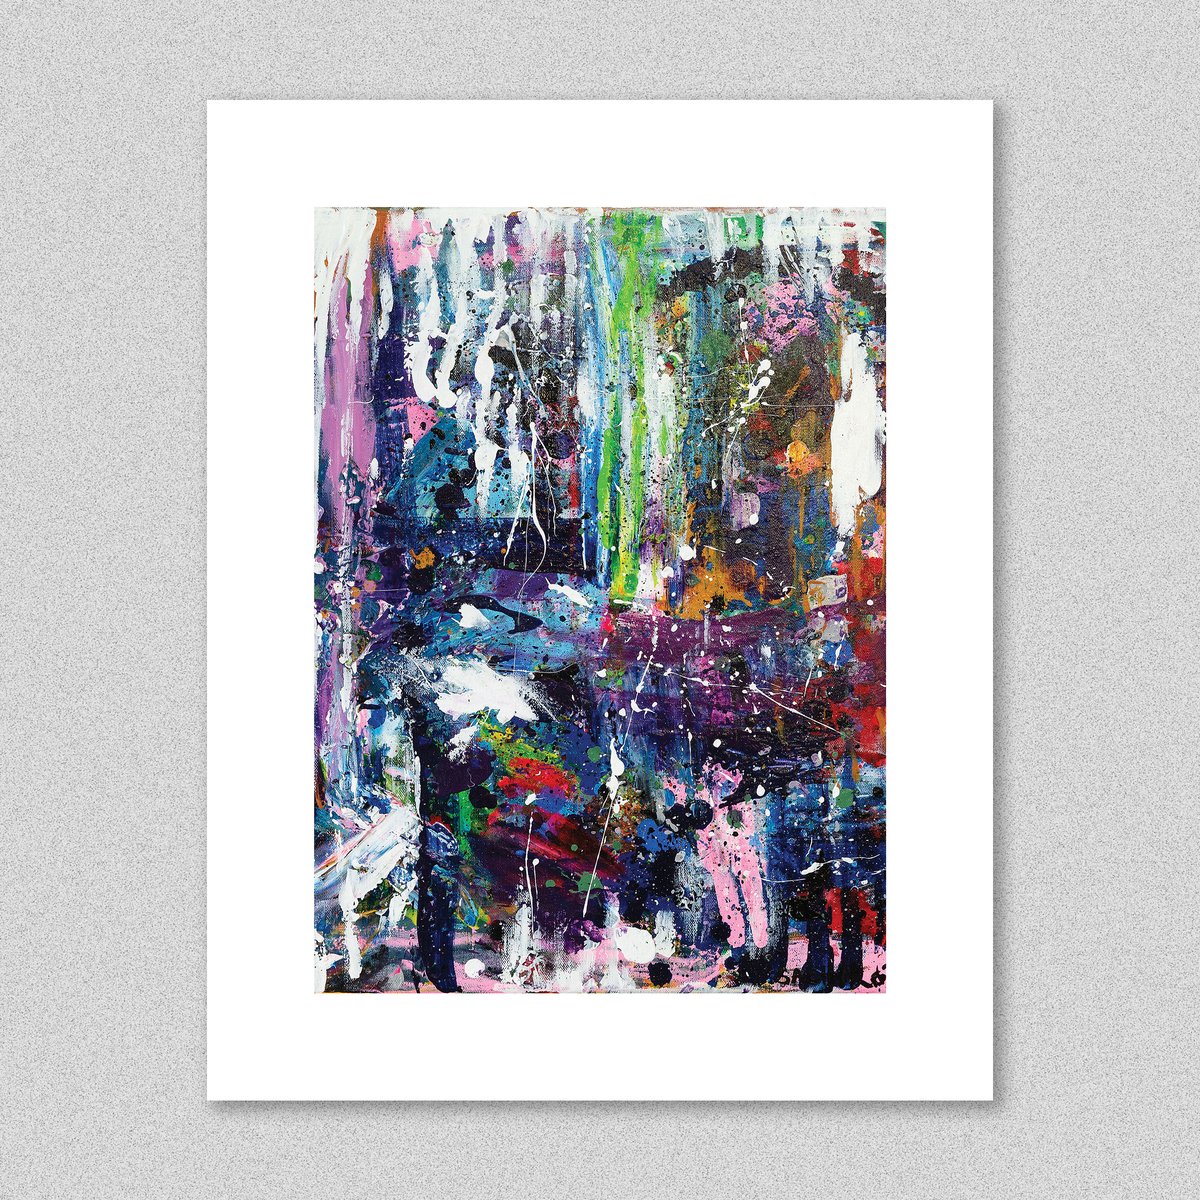 Image of Anxiety 02 - Introduction Collection - Open Edition Art Prints